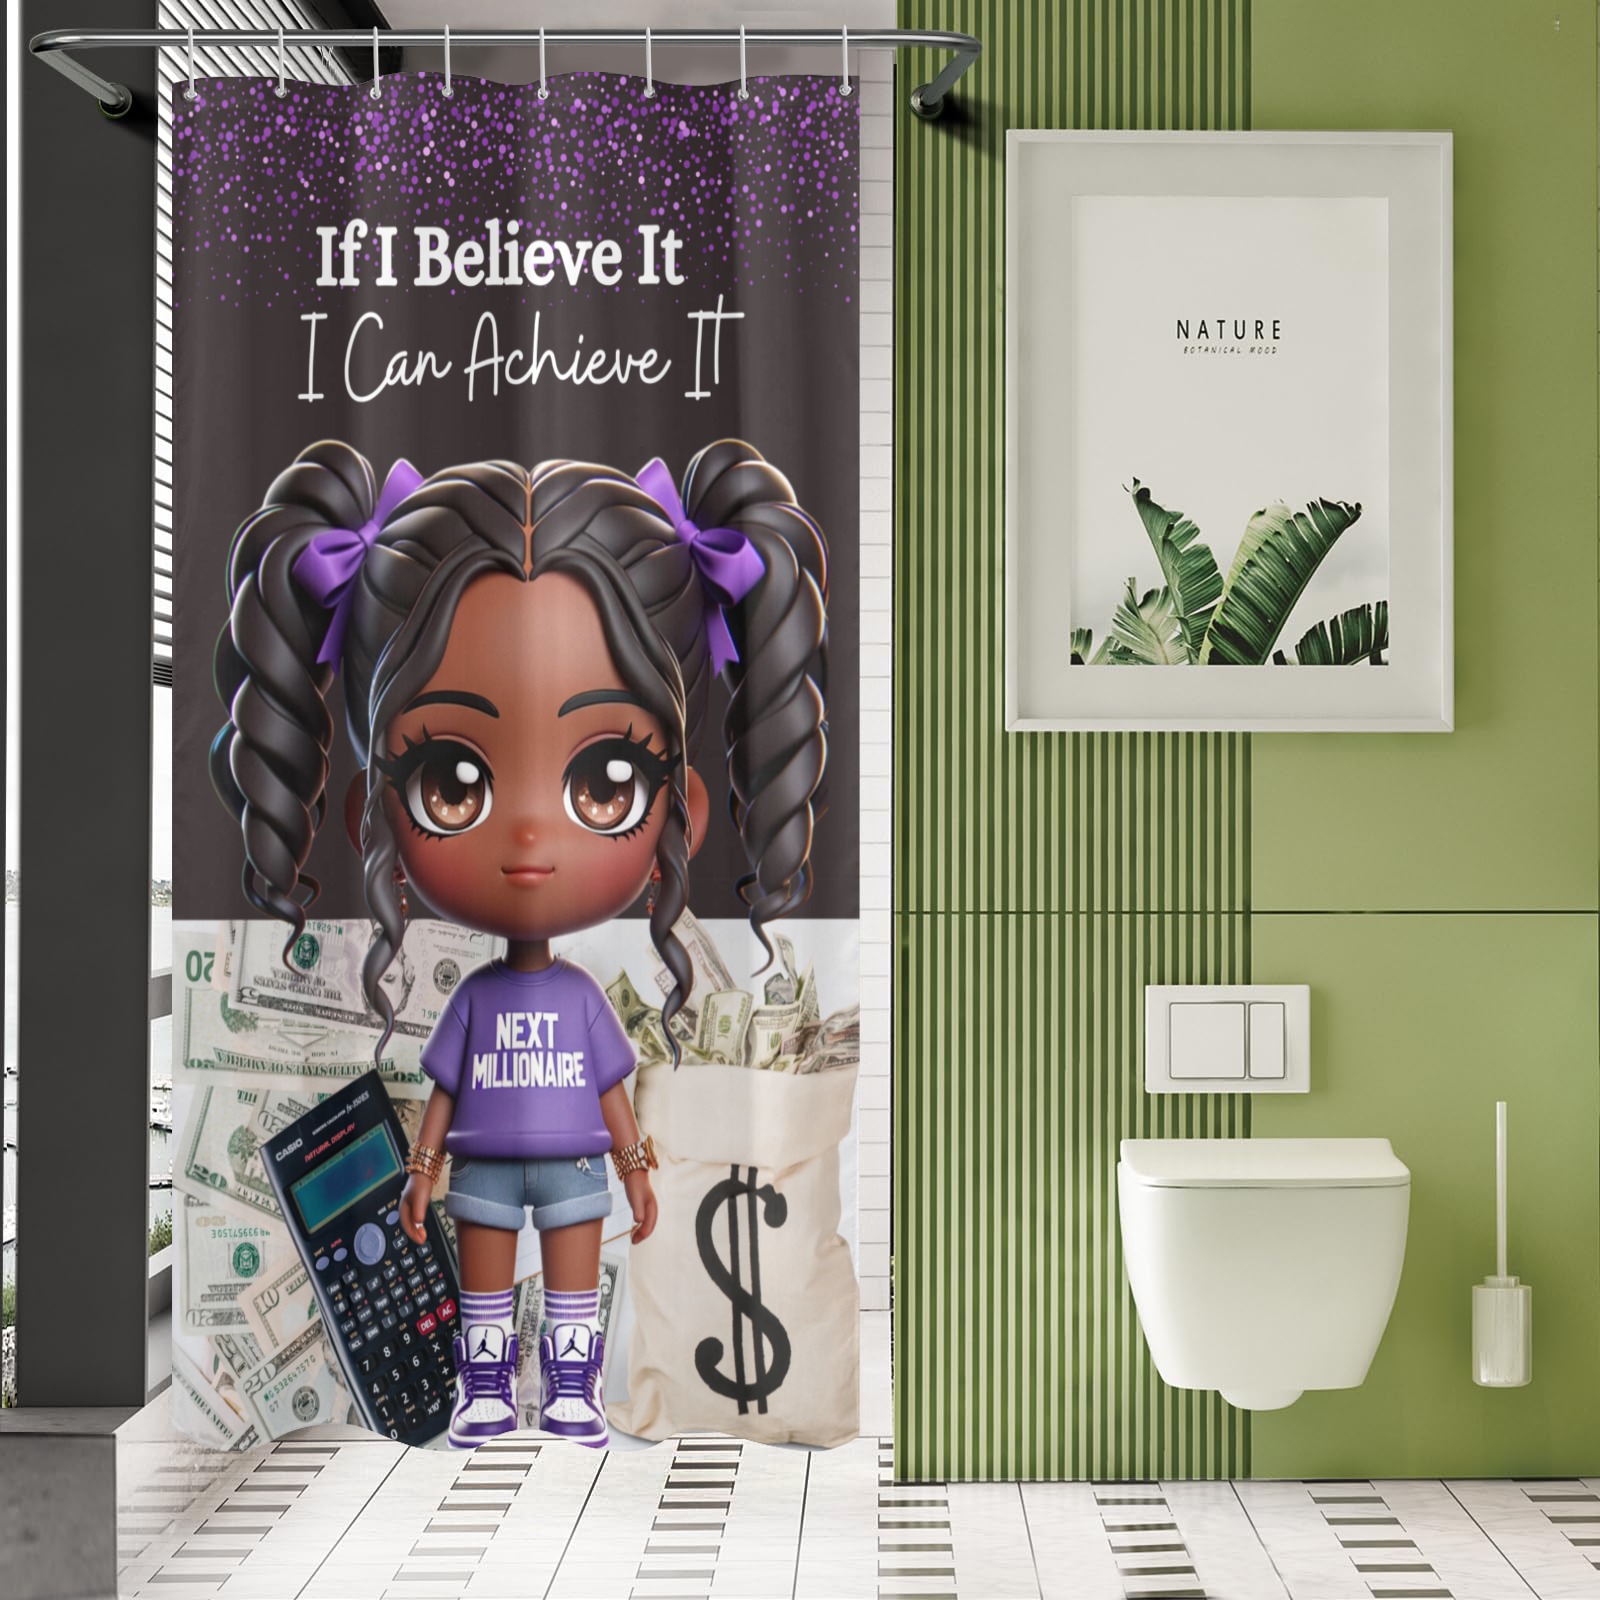 If I Believe It I can achieve it Shower Curtain 48"x72"